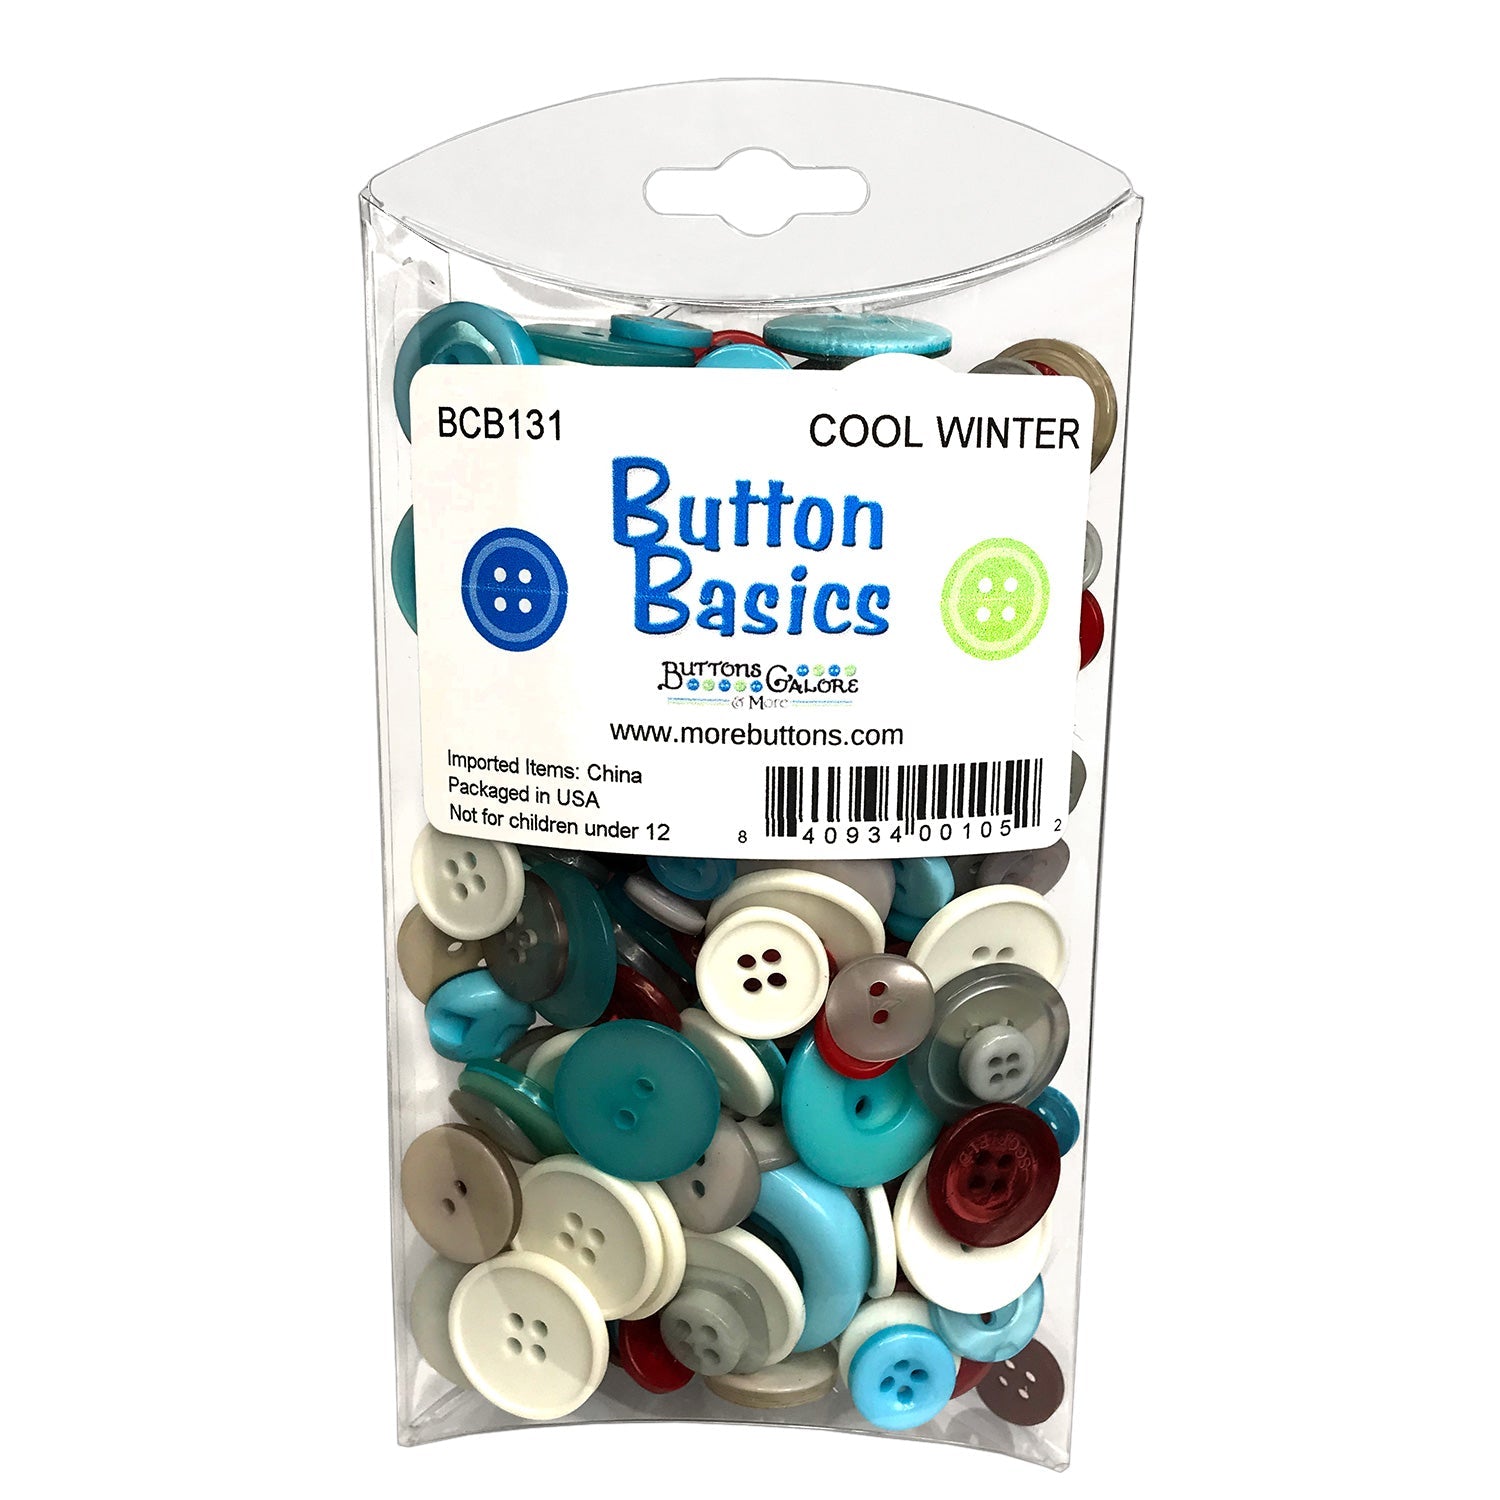 Buttons Large Multi Colored, Mixed Coloured Big Buttons